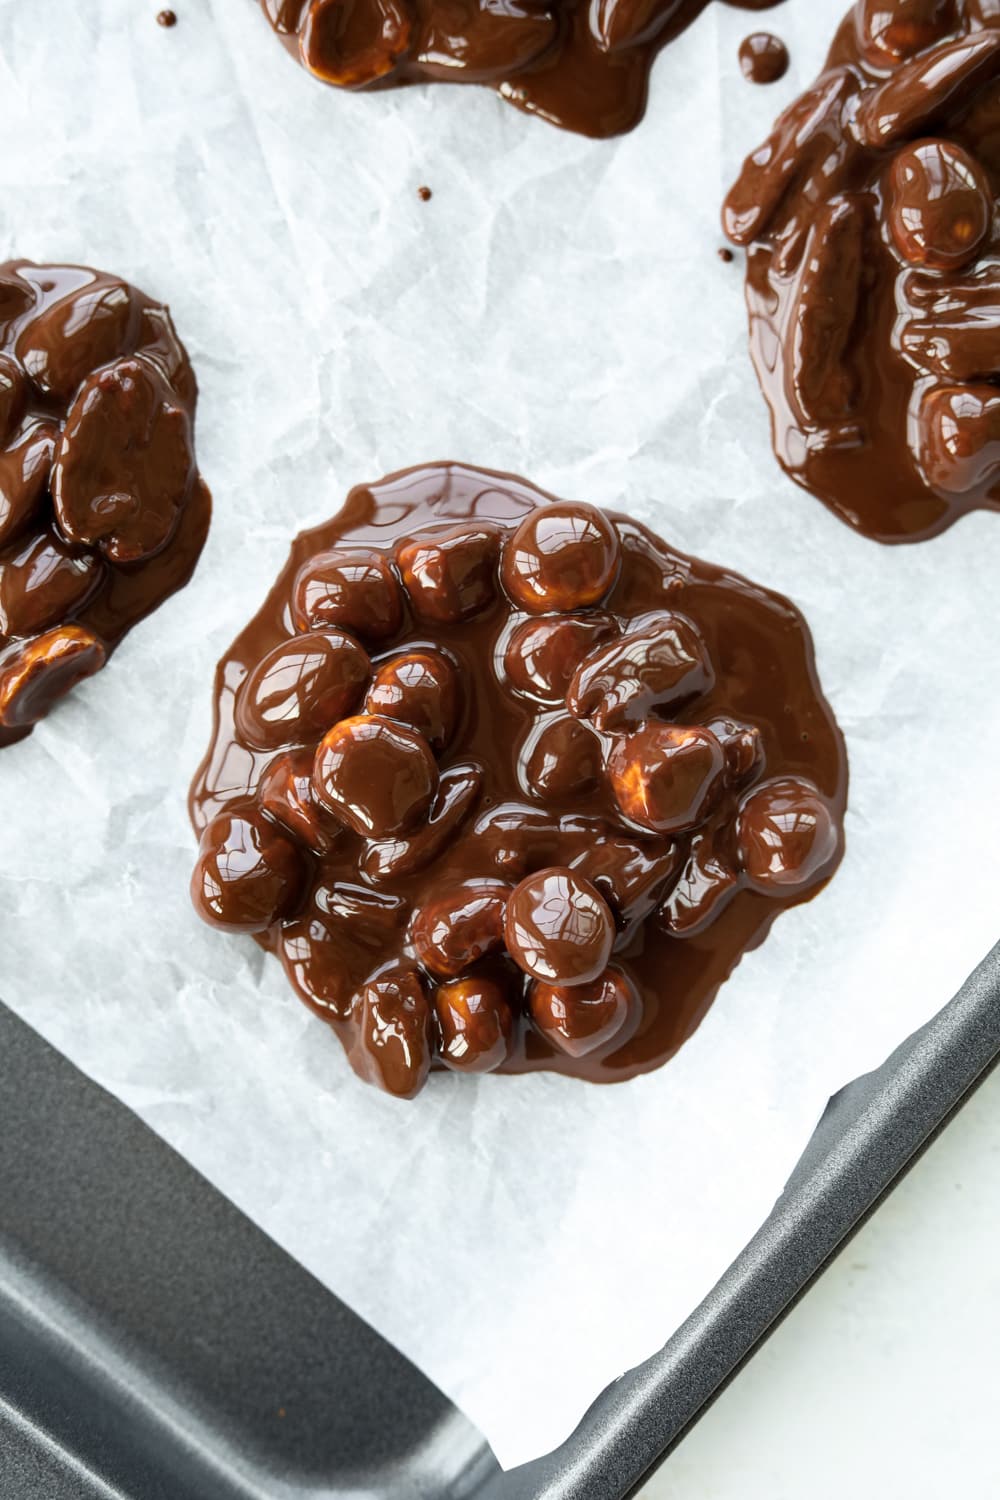 Melted chocolate and nuts spooned onto a baking sheet lined with parchment paper.